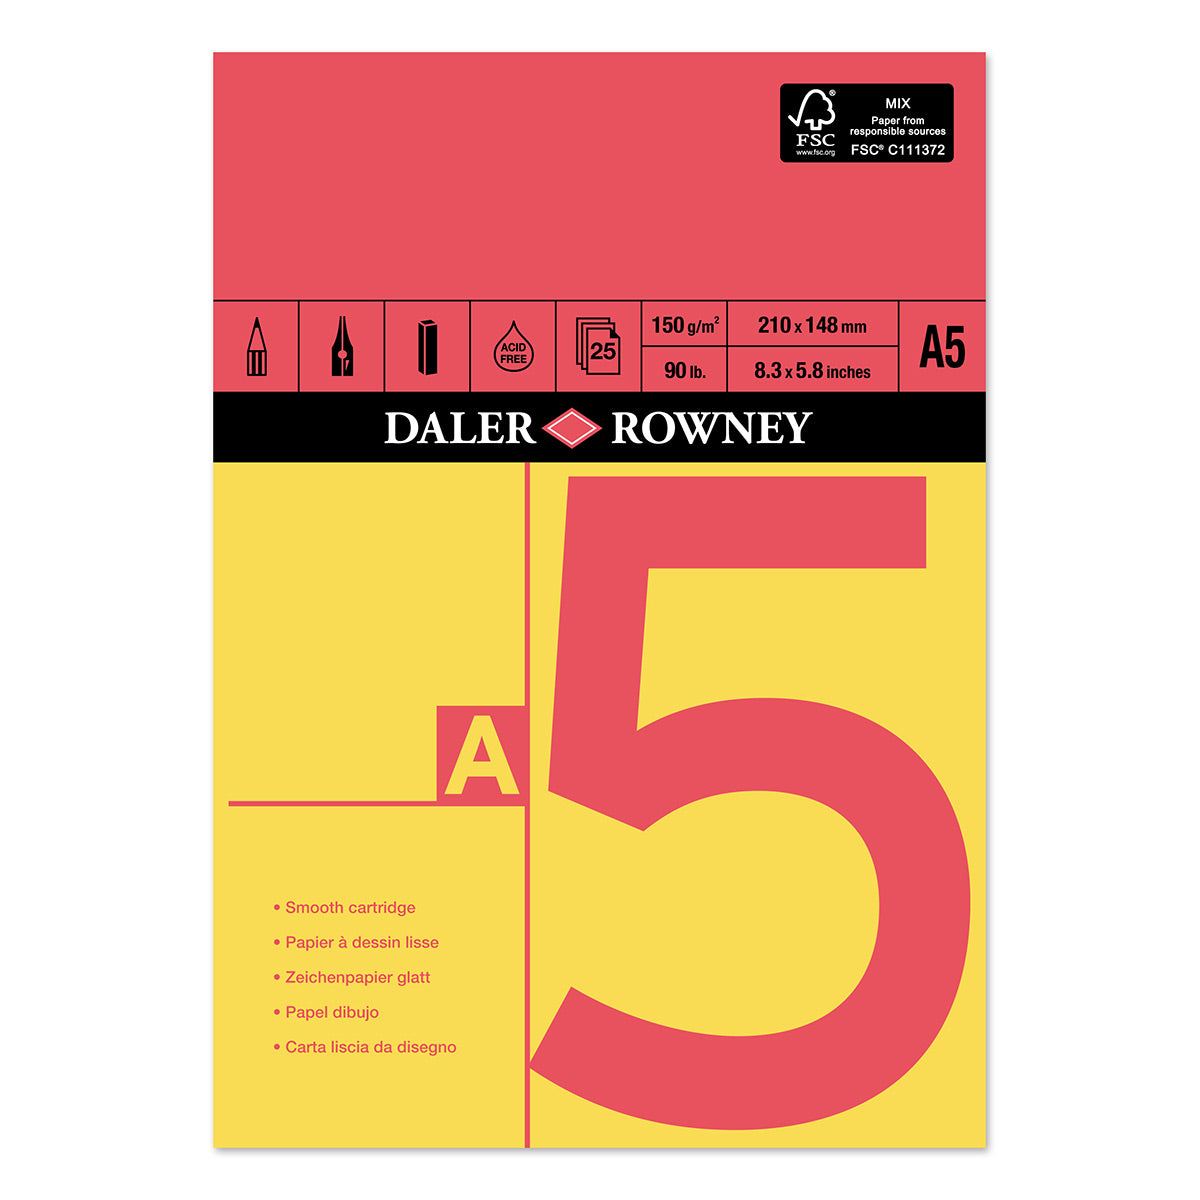 Daler Rowney - Red & Yellow Gummed Cartridge Sketch Pad - A5 - 150gsm